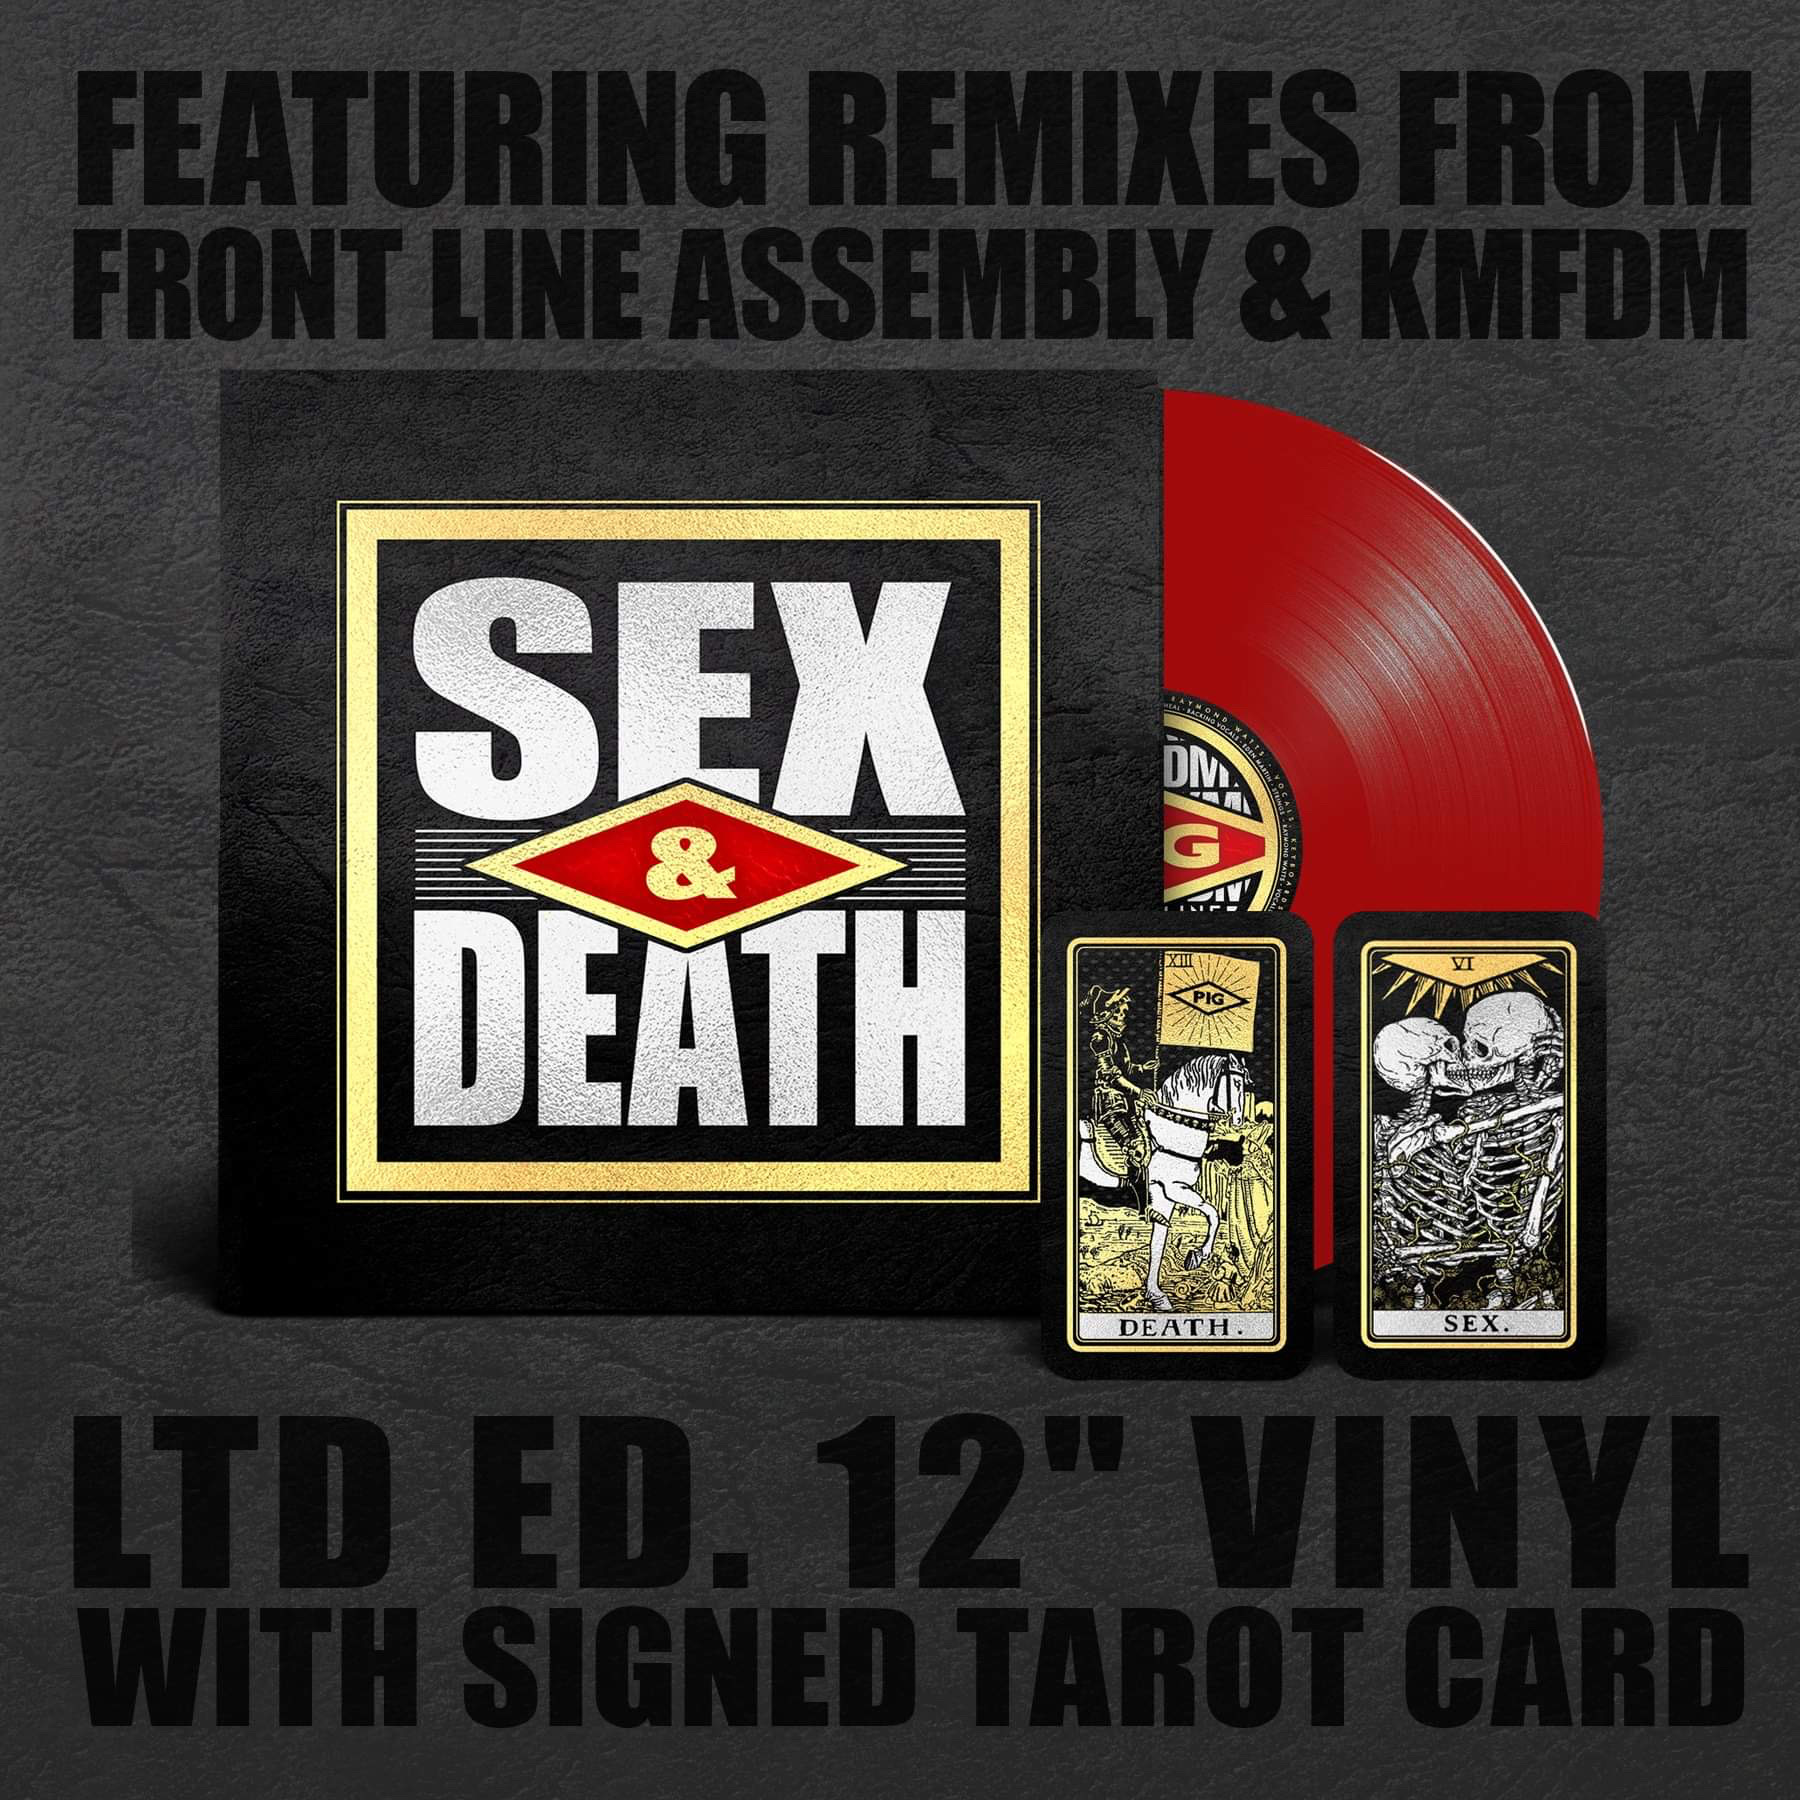 NEW: LIMITED EDITION SEX & DEATH